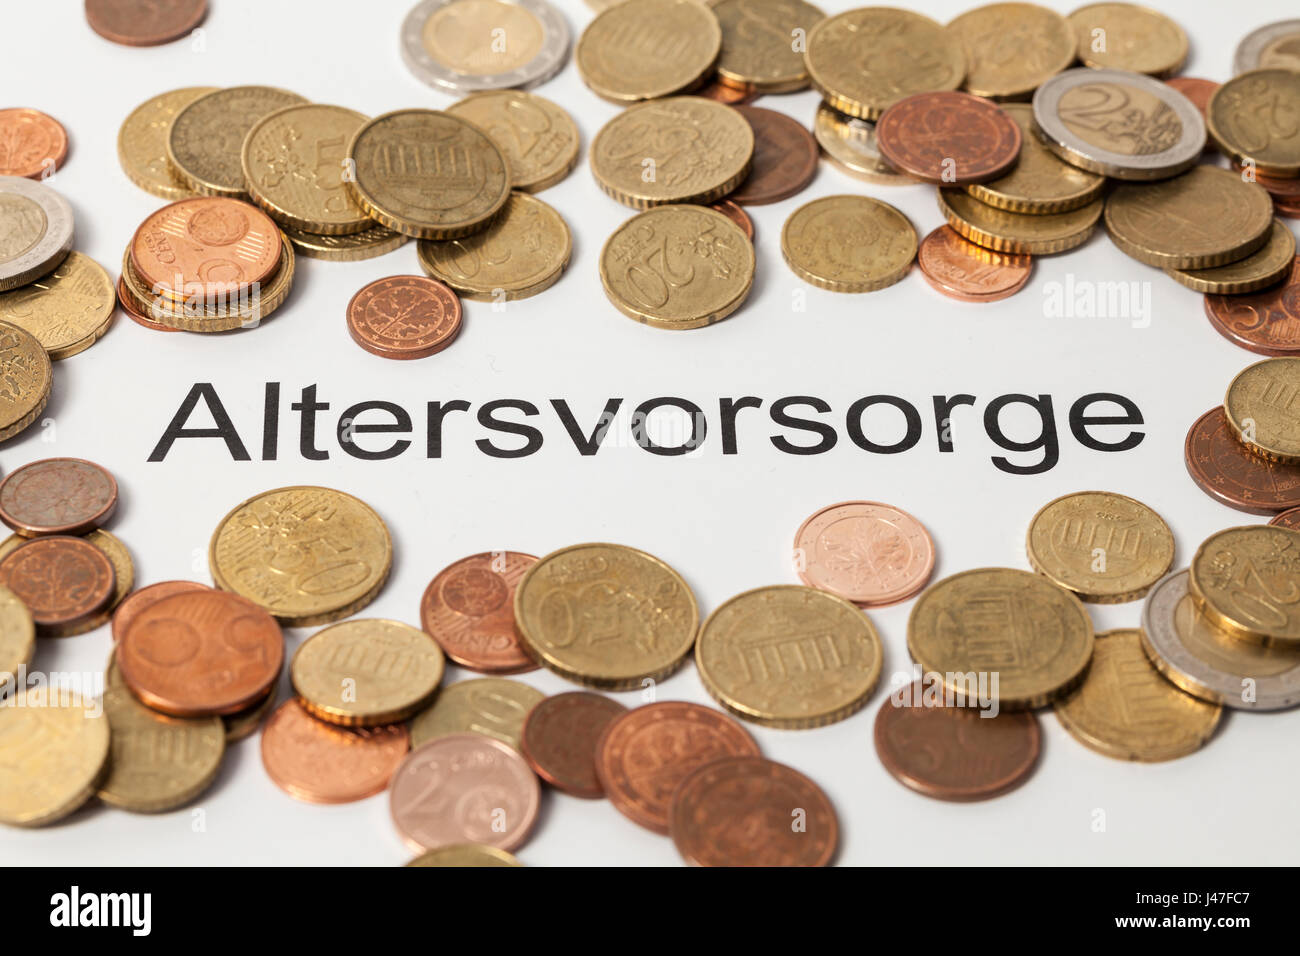 Altersvorsorge (pension plan in german) and Euro coins Stock Photo